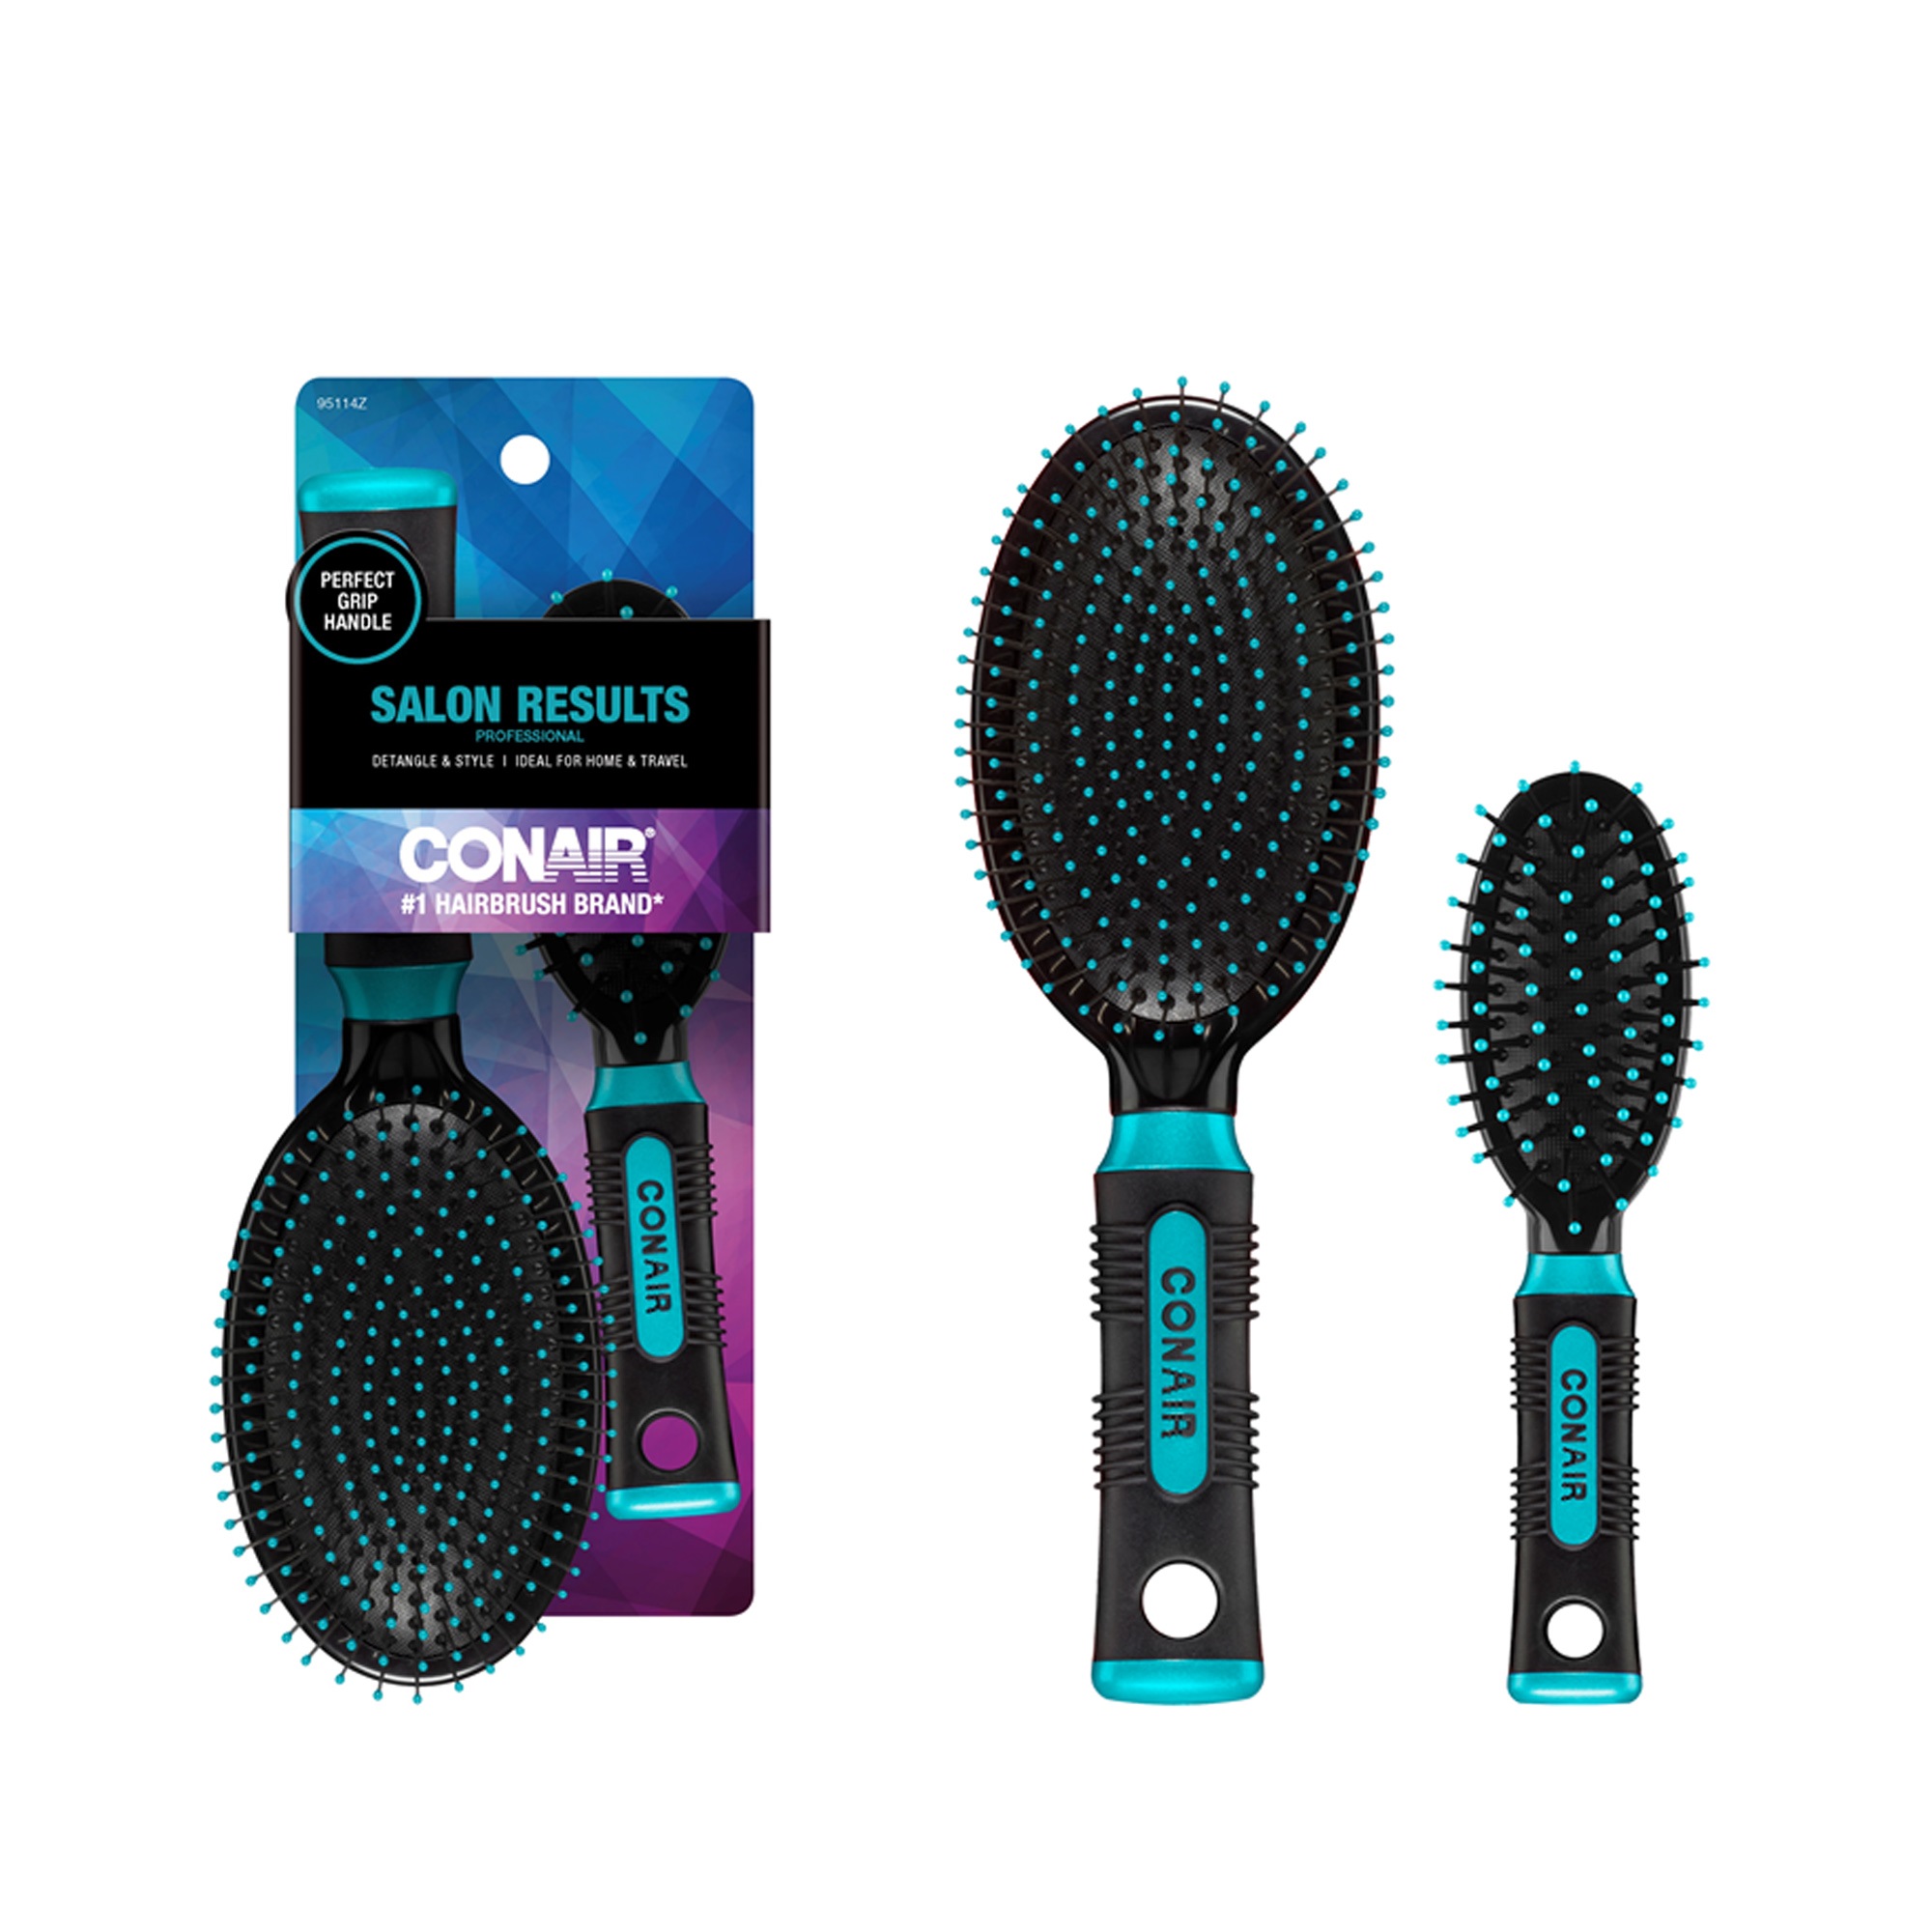 Conair Professional Travel and Full-Size Cushion Hairbrush Set, Colors Vary, 2 Piece Set - image 5 of 8